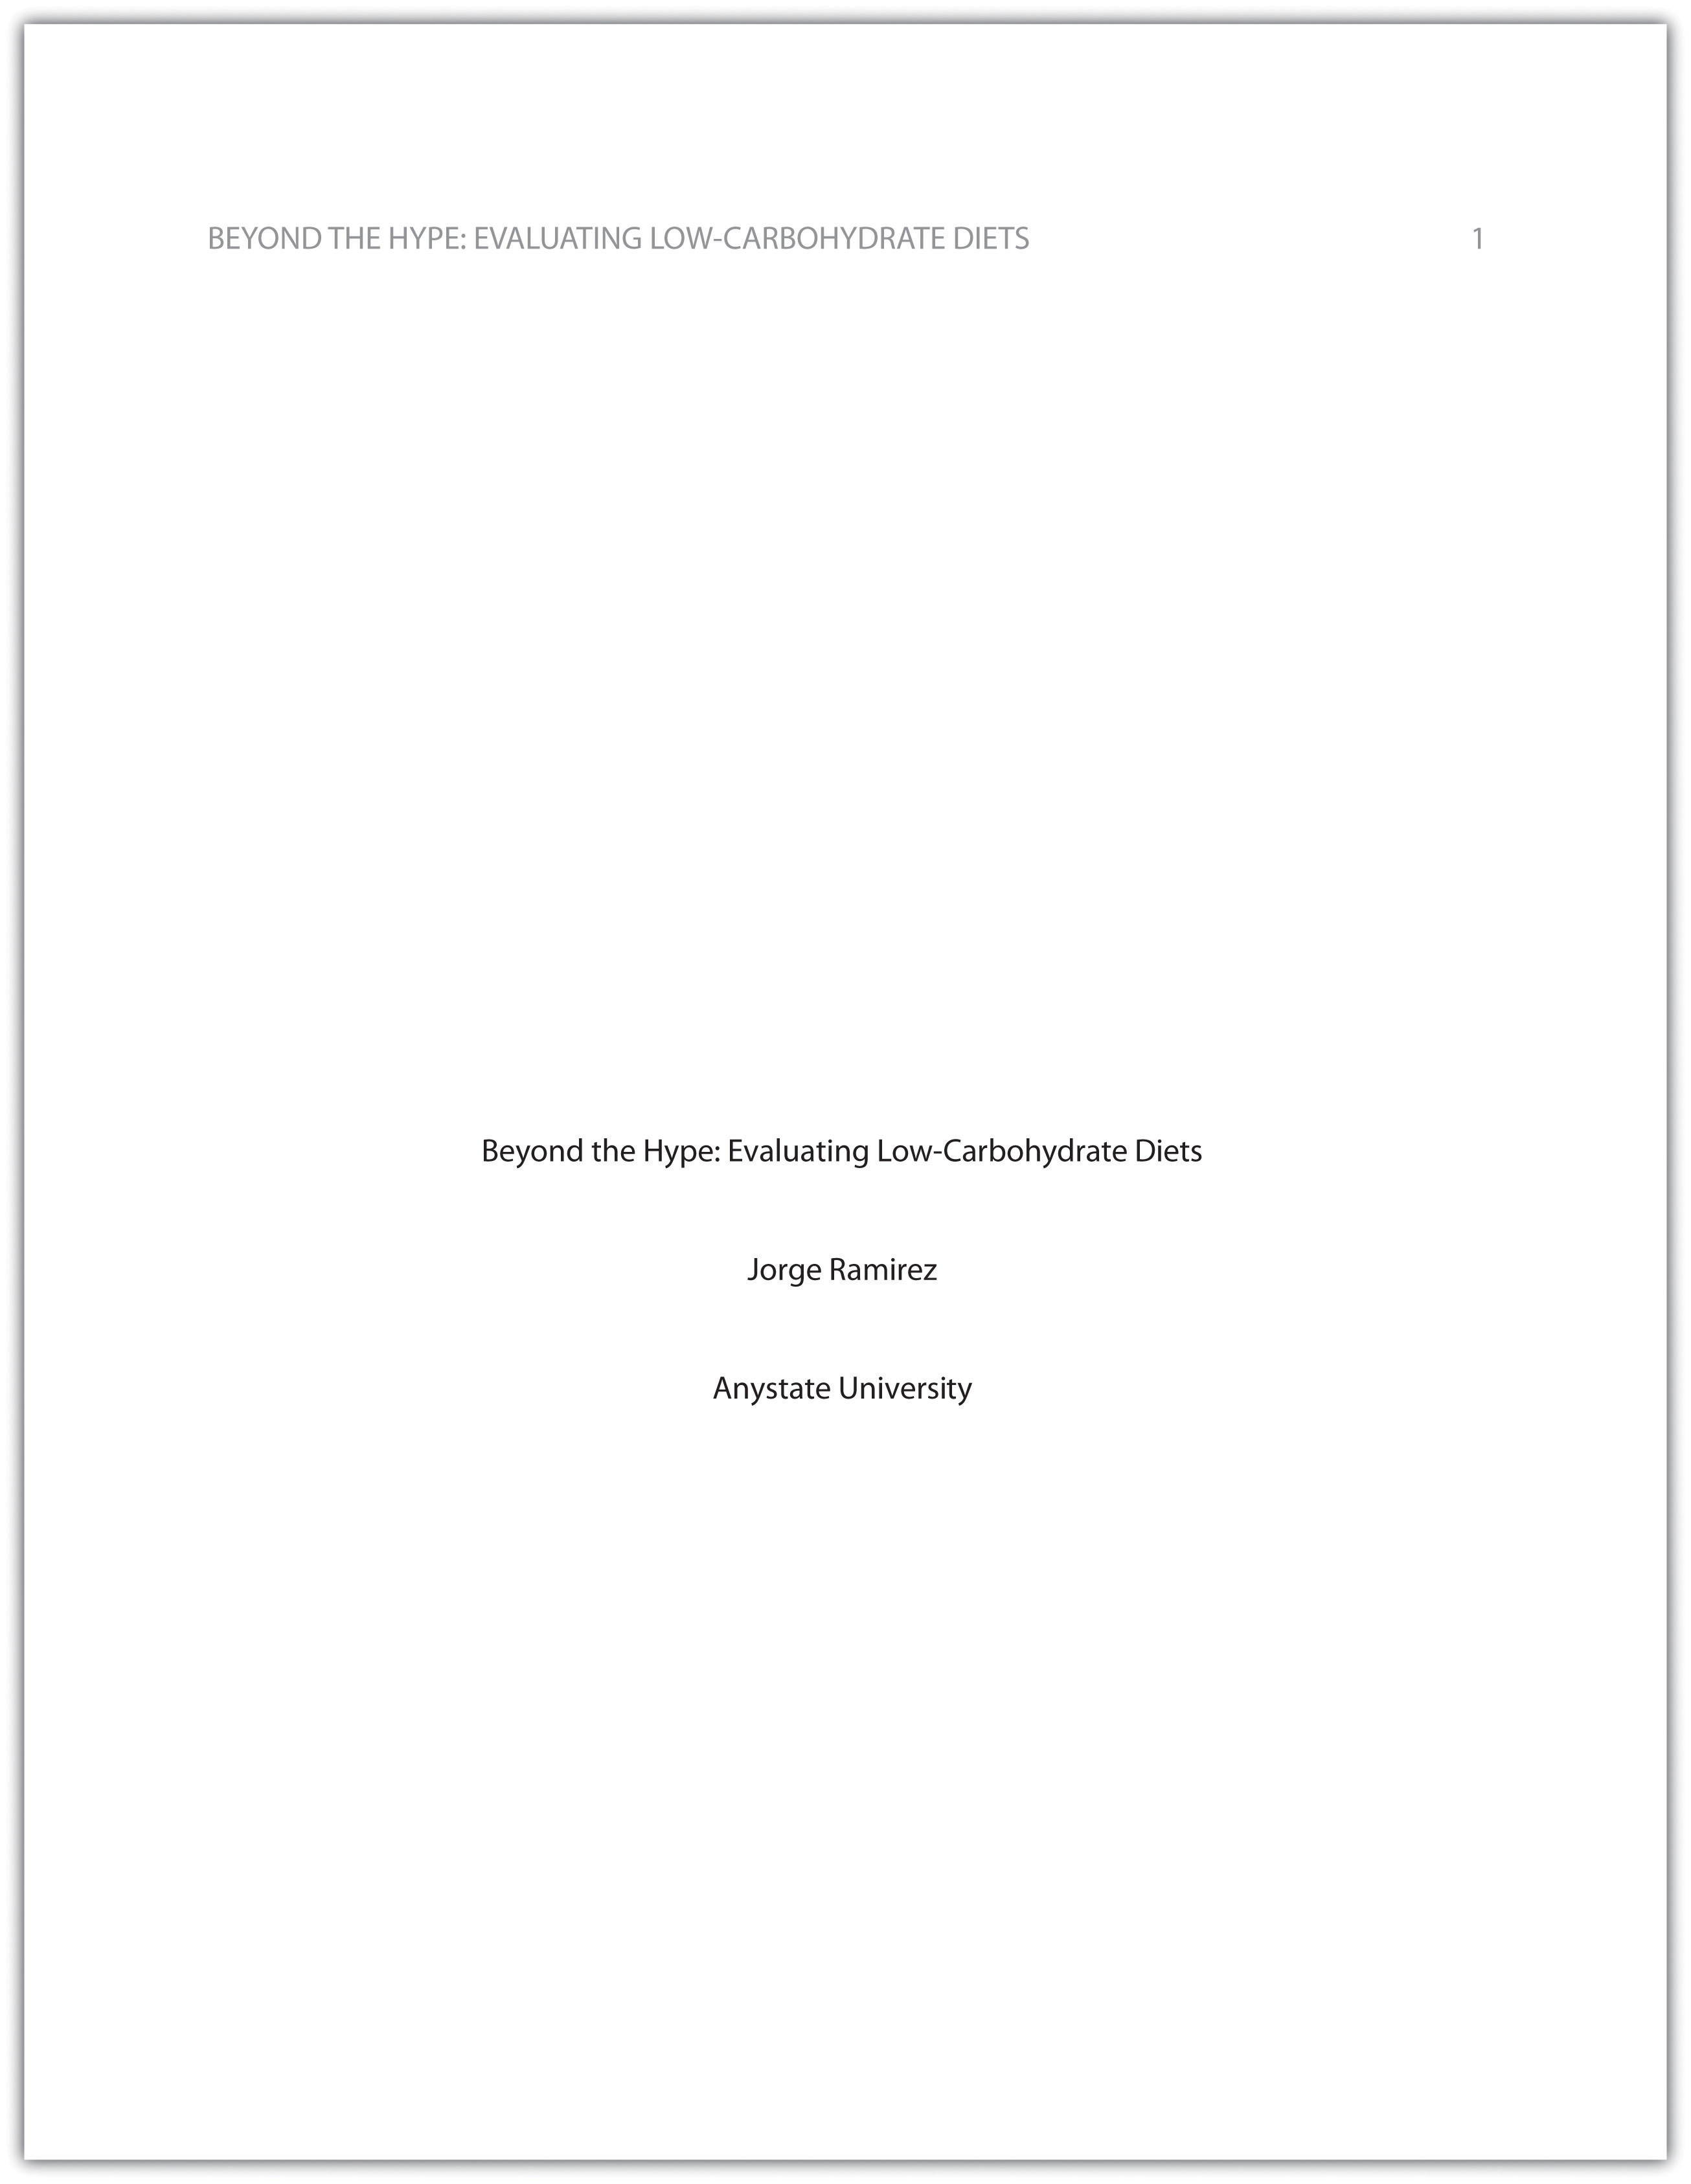 title page for research paper chicago style